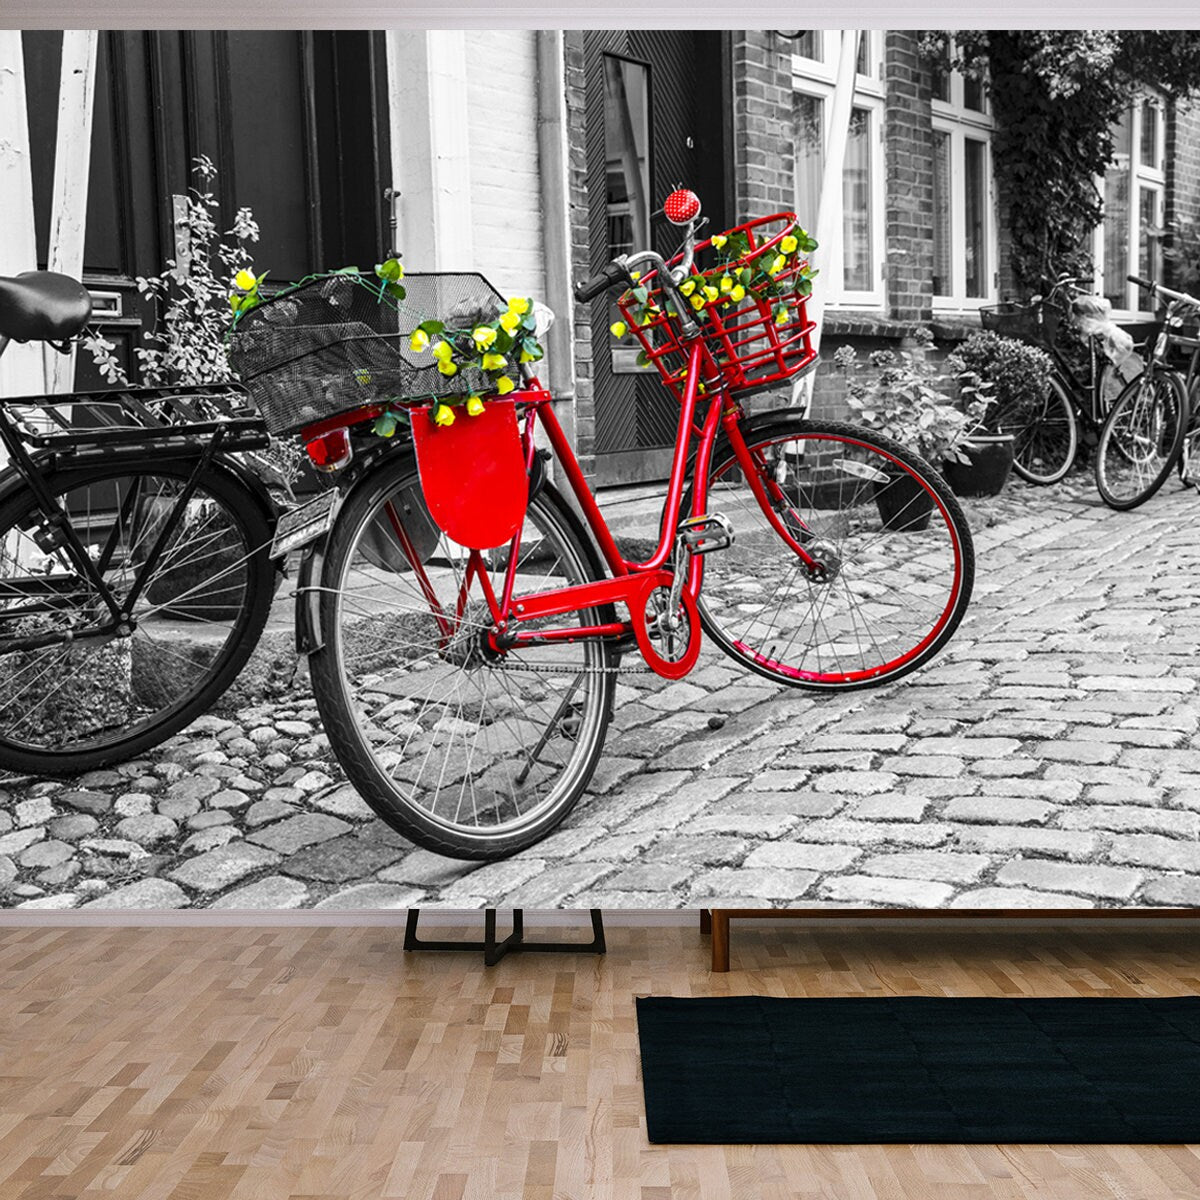 Retro Vintage Red Bicycle on Cobblestone Street in the Old Town. Black And White Toned Wallpaper Living Room Mural